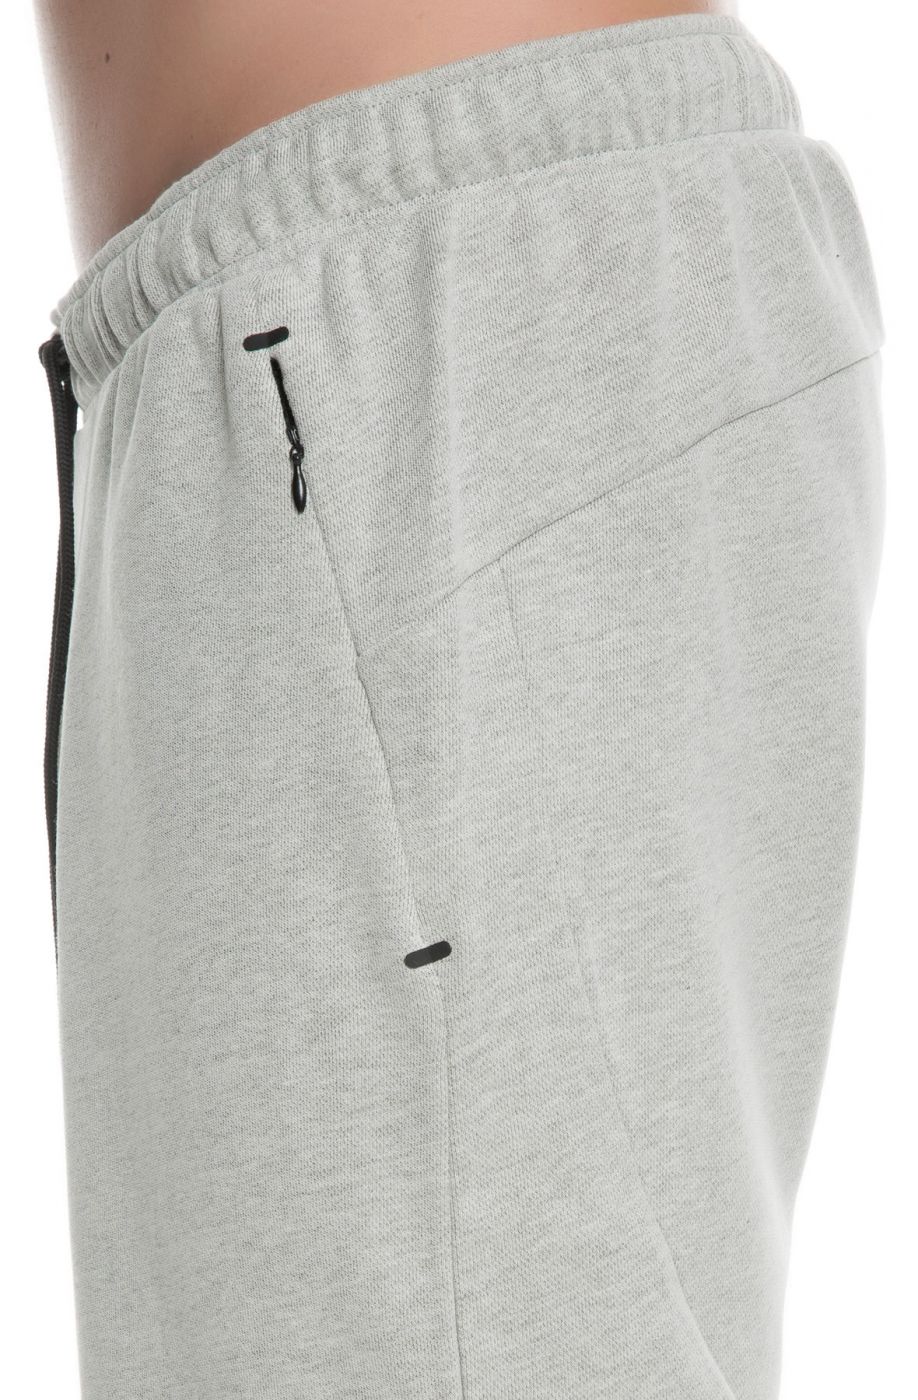 The Jet Set Shorts in Ash Heather Grey